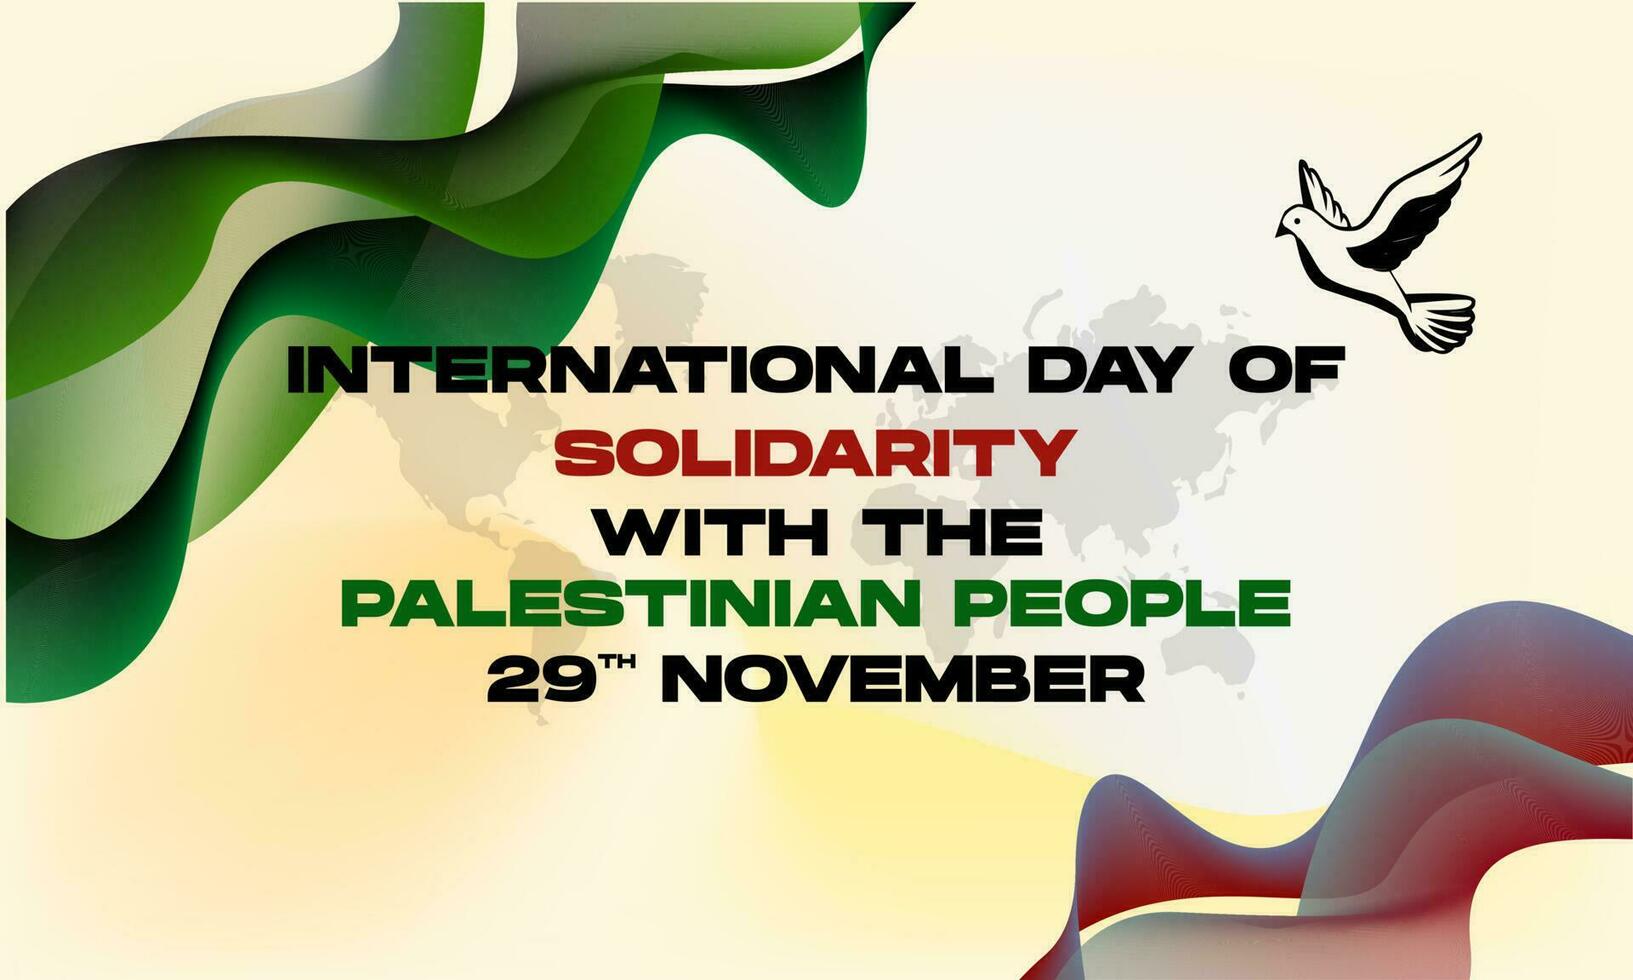 International Day of Solidarity with the Palestinian People Background with Fluid Effect. For poster, banner, card invitation, social media vector